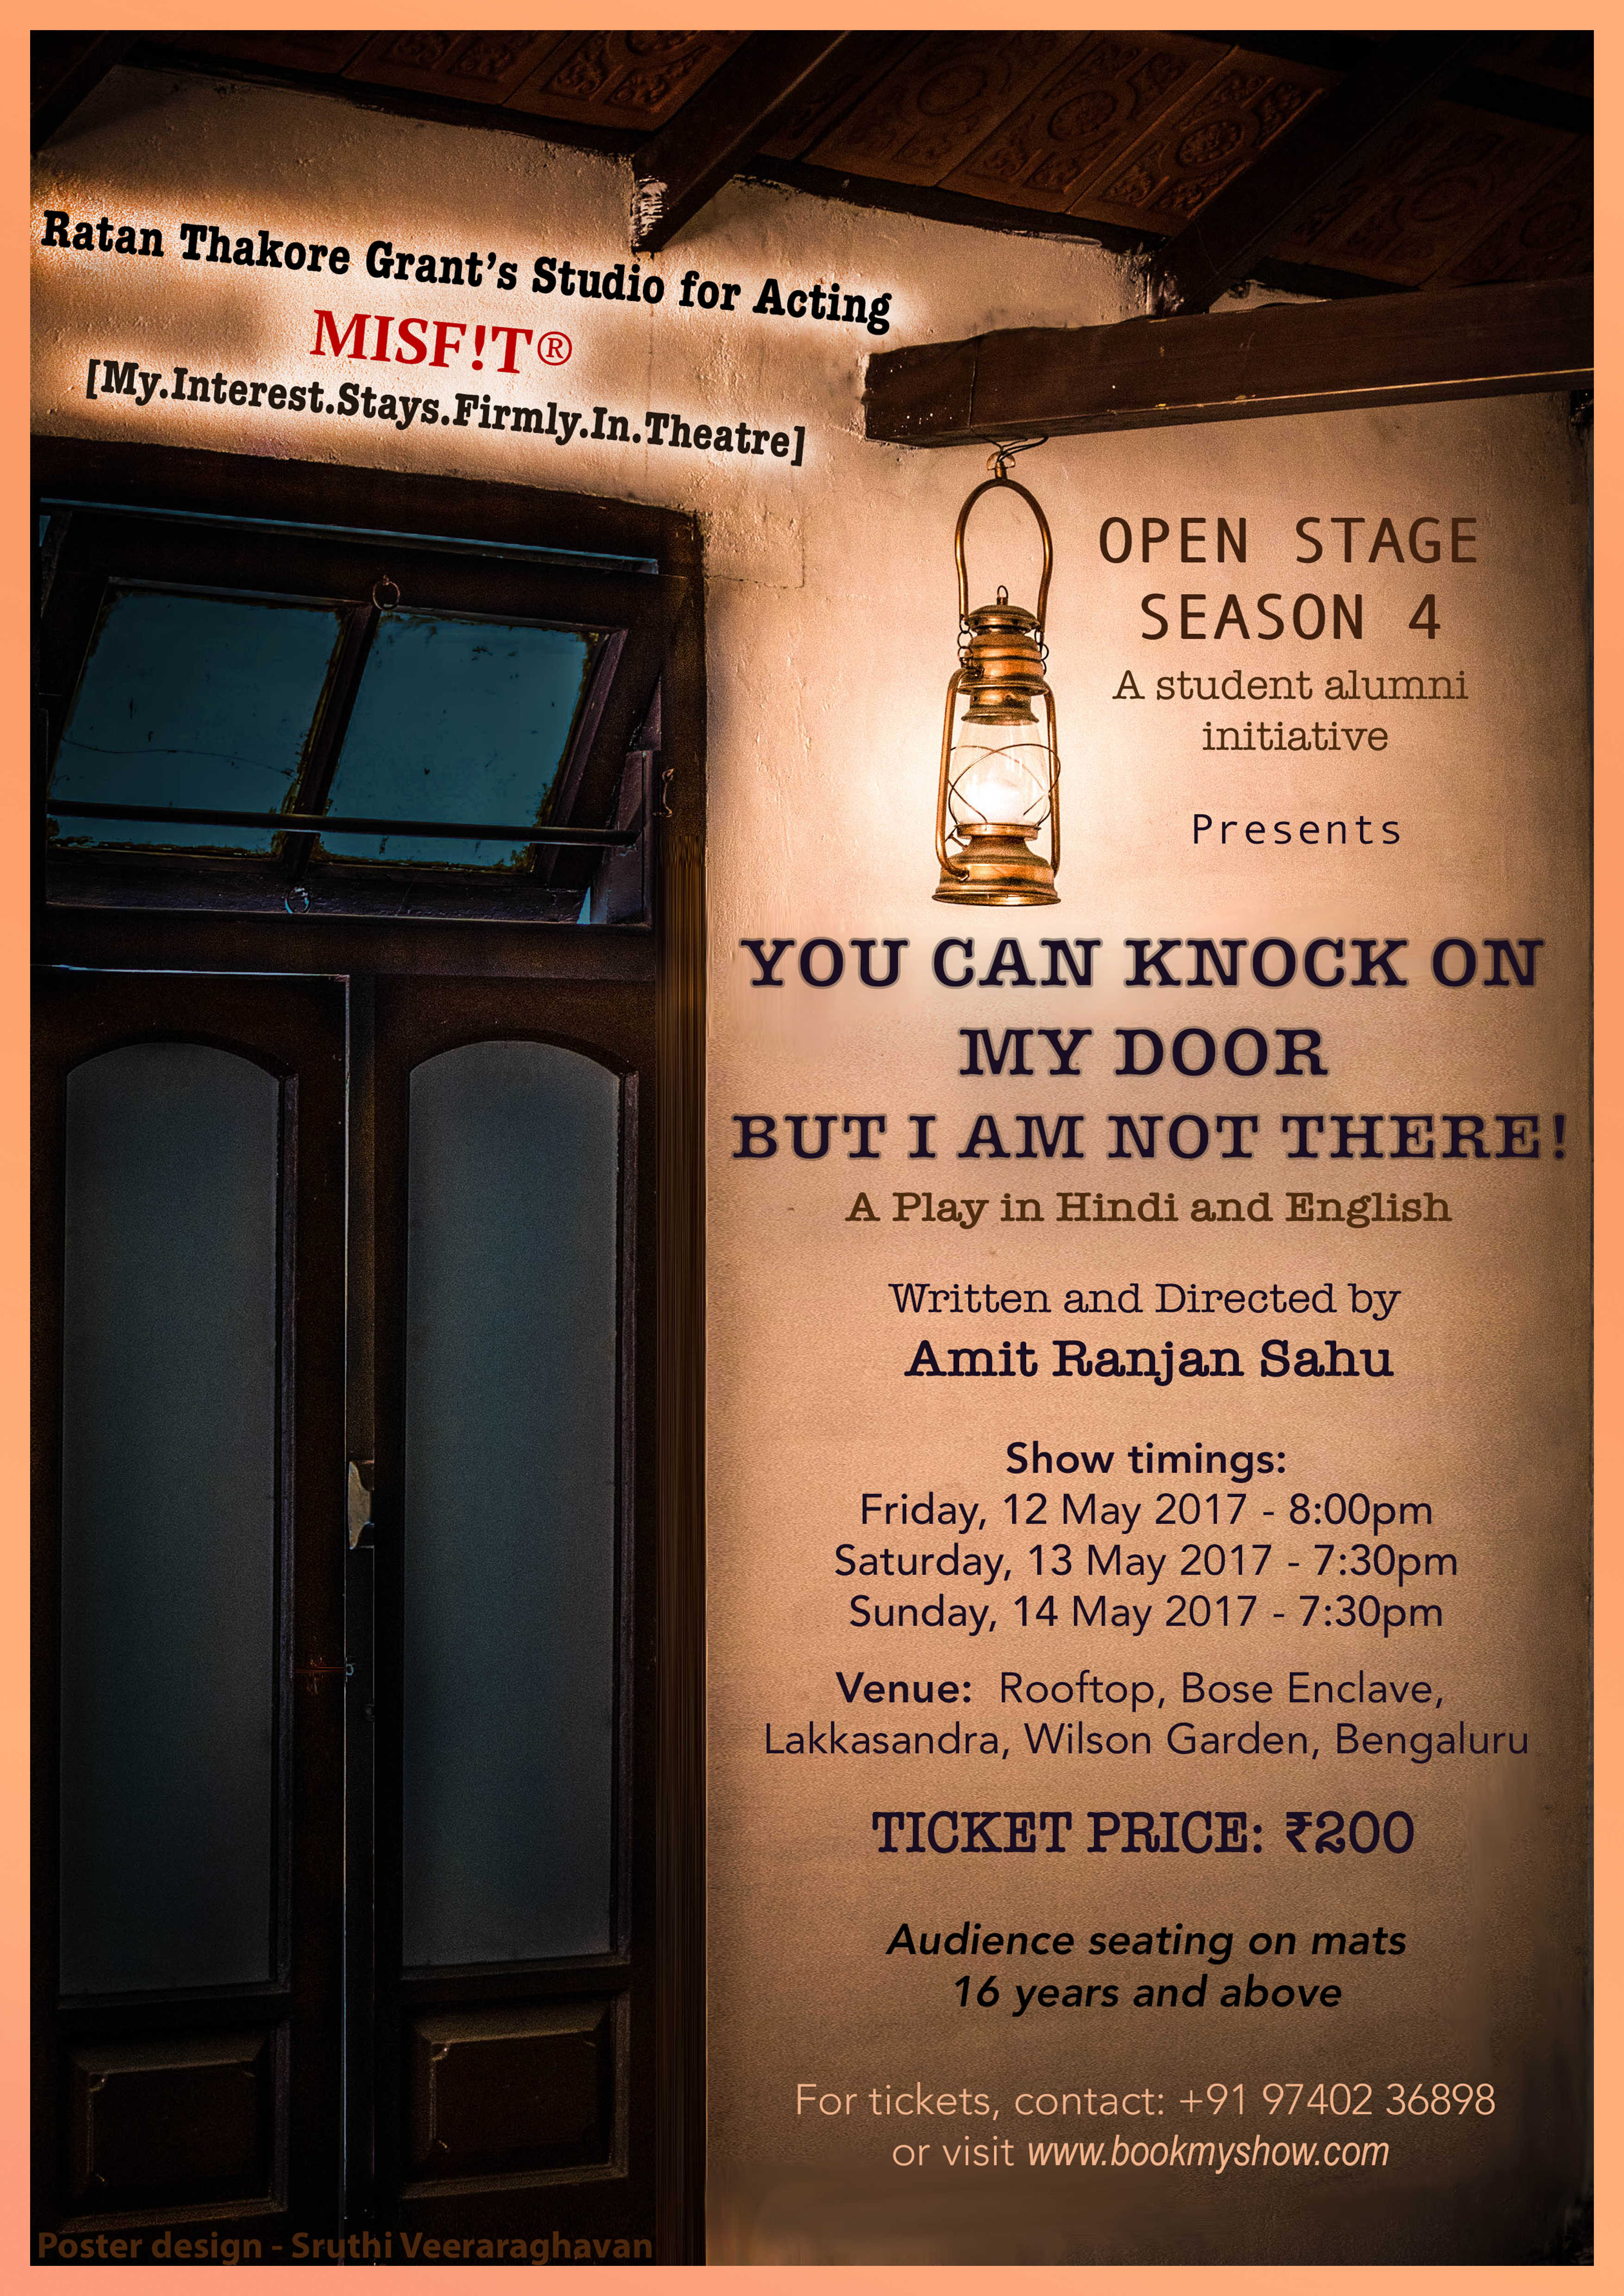 MISF!T Open Stage presents - "You can knock on my door but i am not there"